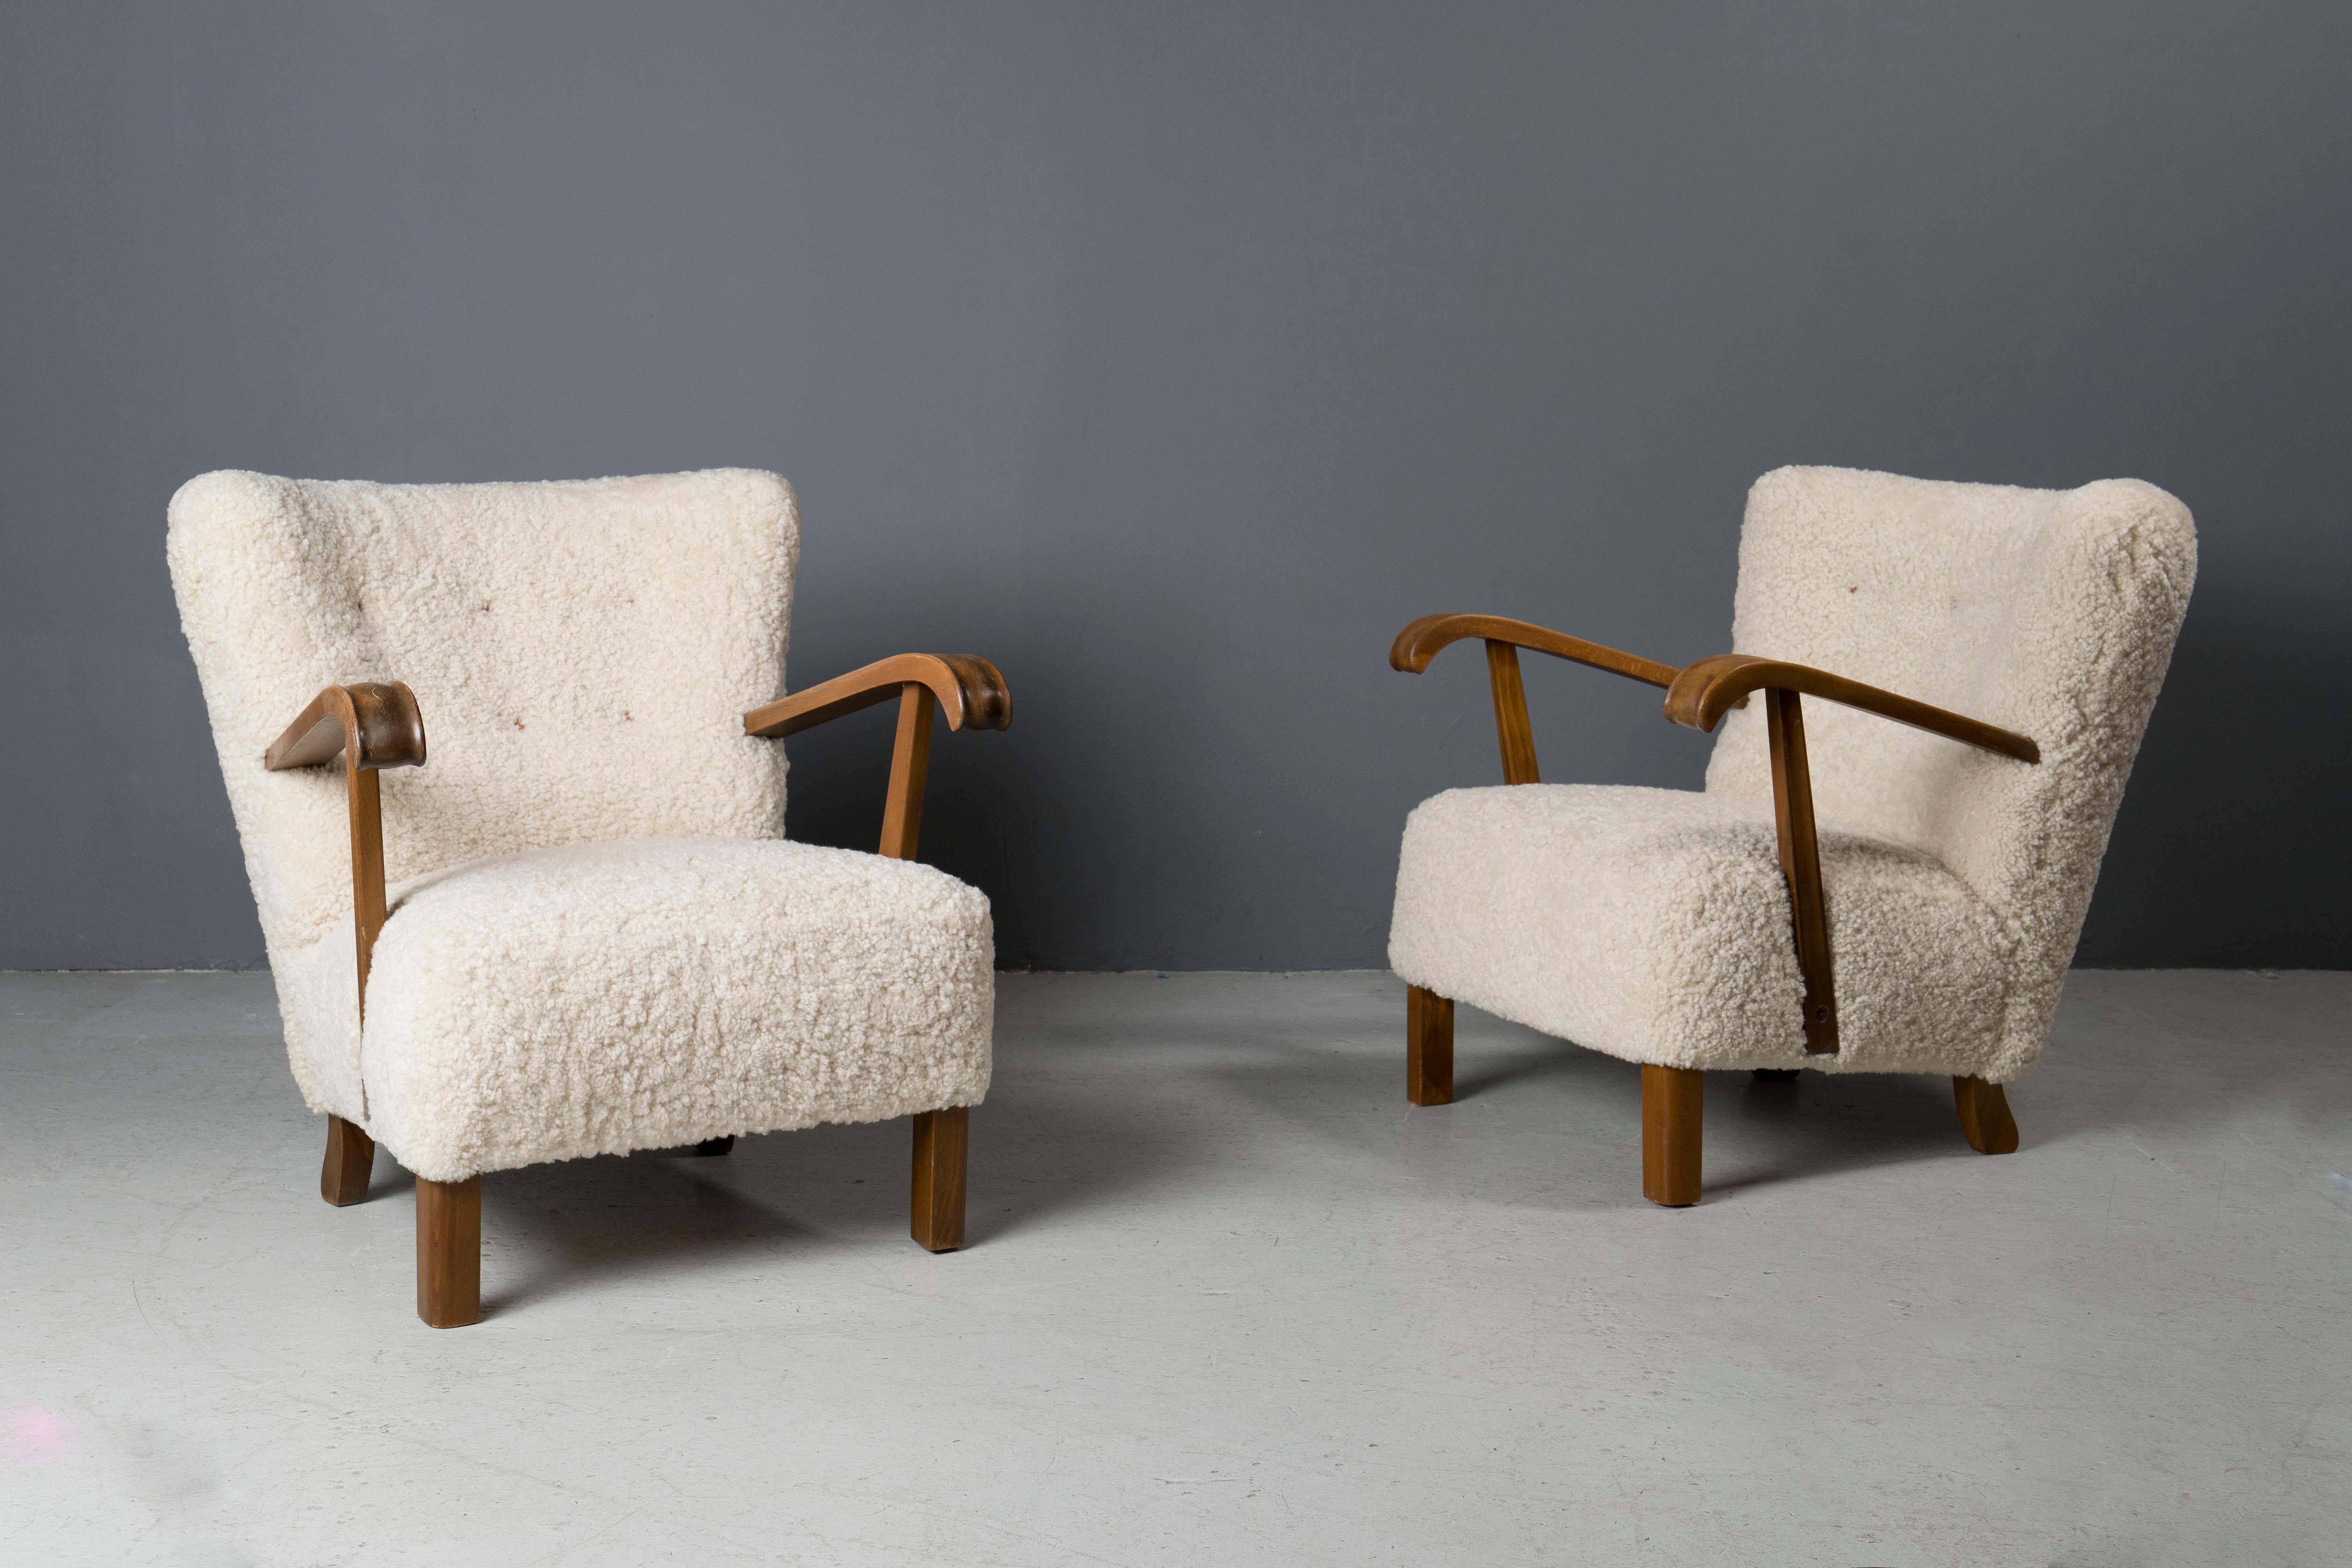 Pair of newly upholstered Fritz Hansen style Swedish chairs in shearling.